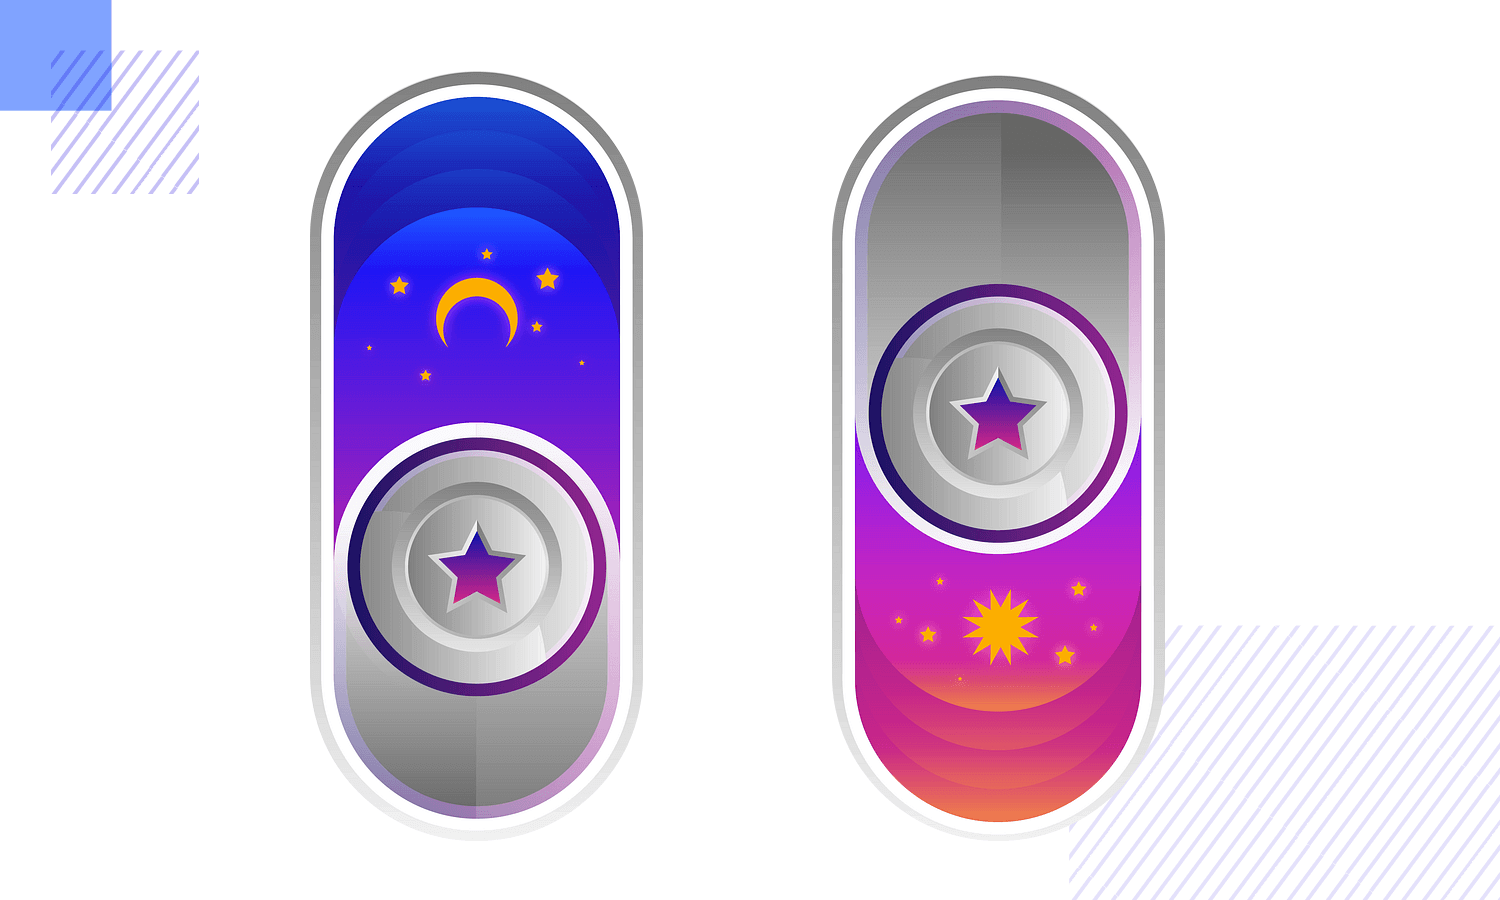 Stellar-themed toggle buttons with night and day designs